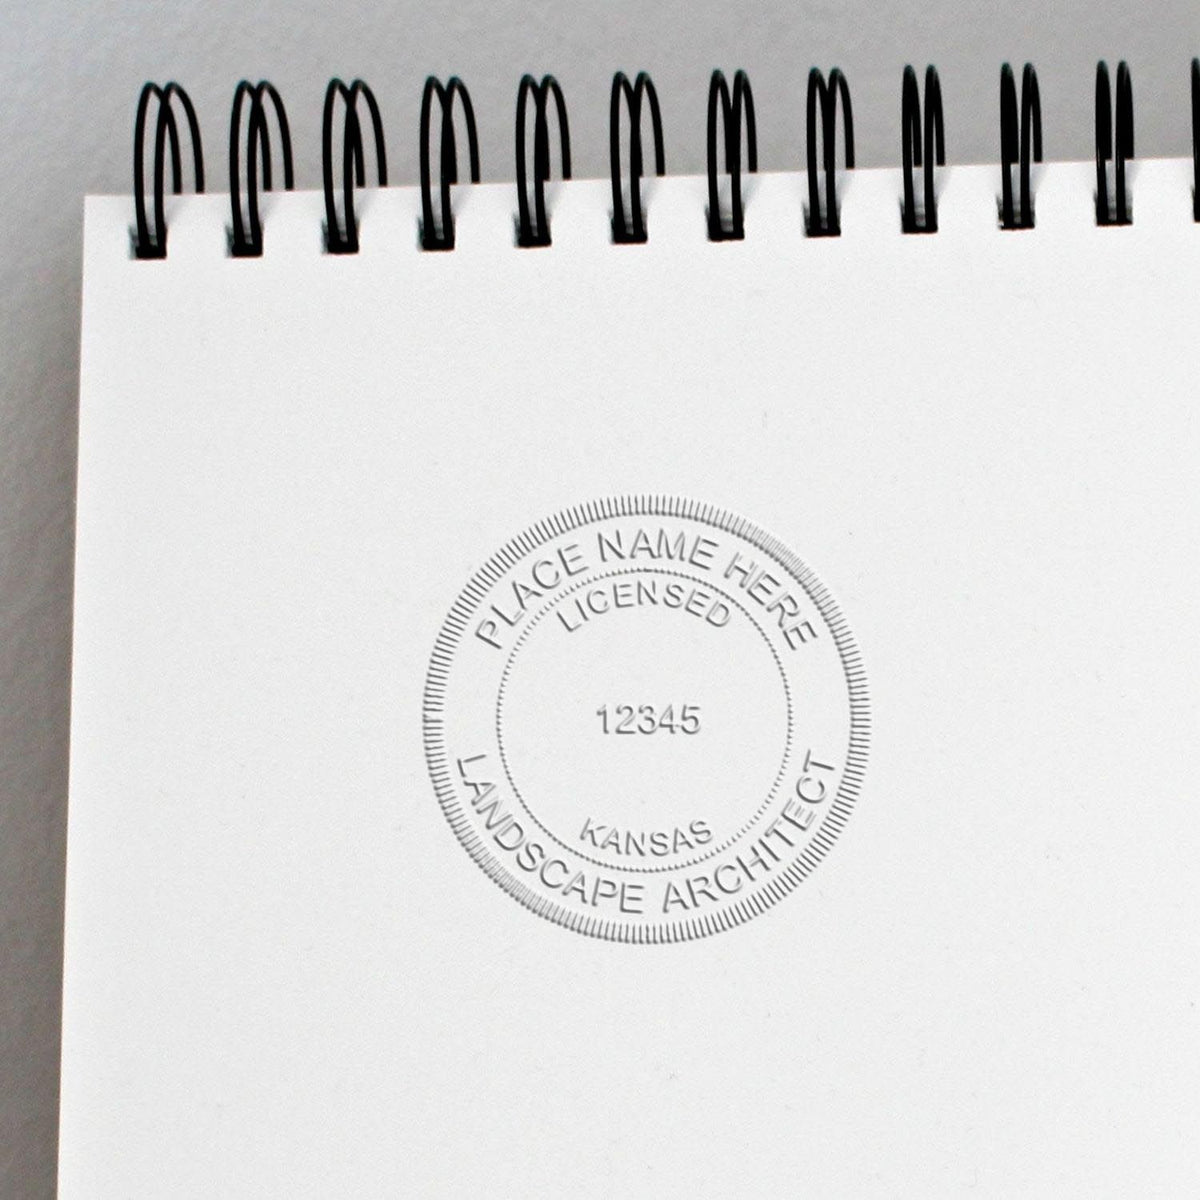 An in use photo of the Gift Kansas Landscape Architect Seal showing a sample imprint on a cardstock